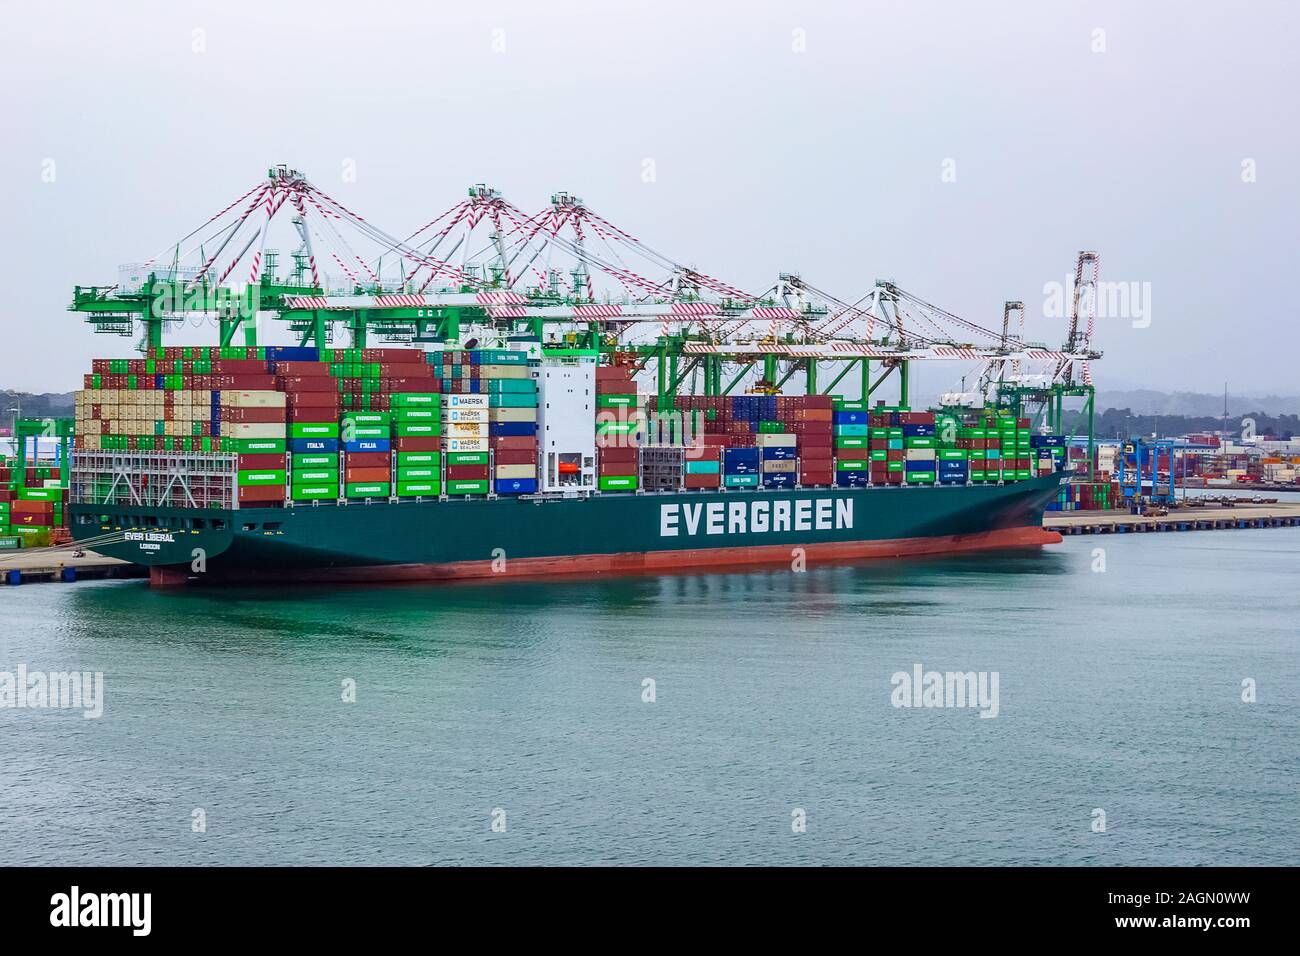 Colon, Panama - December 8, 2019: Evergreen container ship with full of cargo docked in port Stock Photo